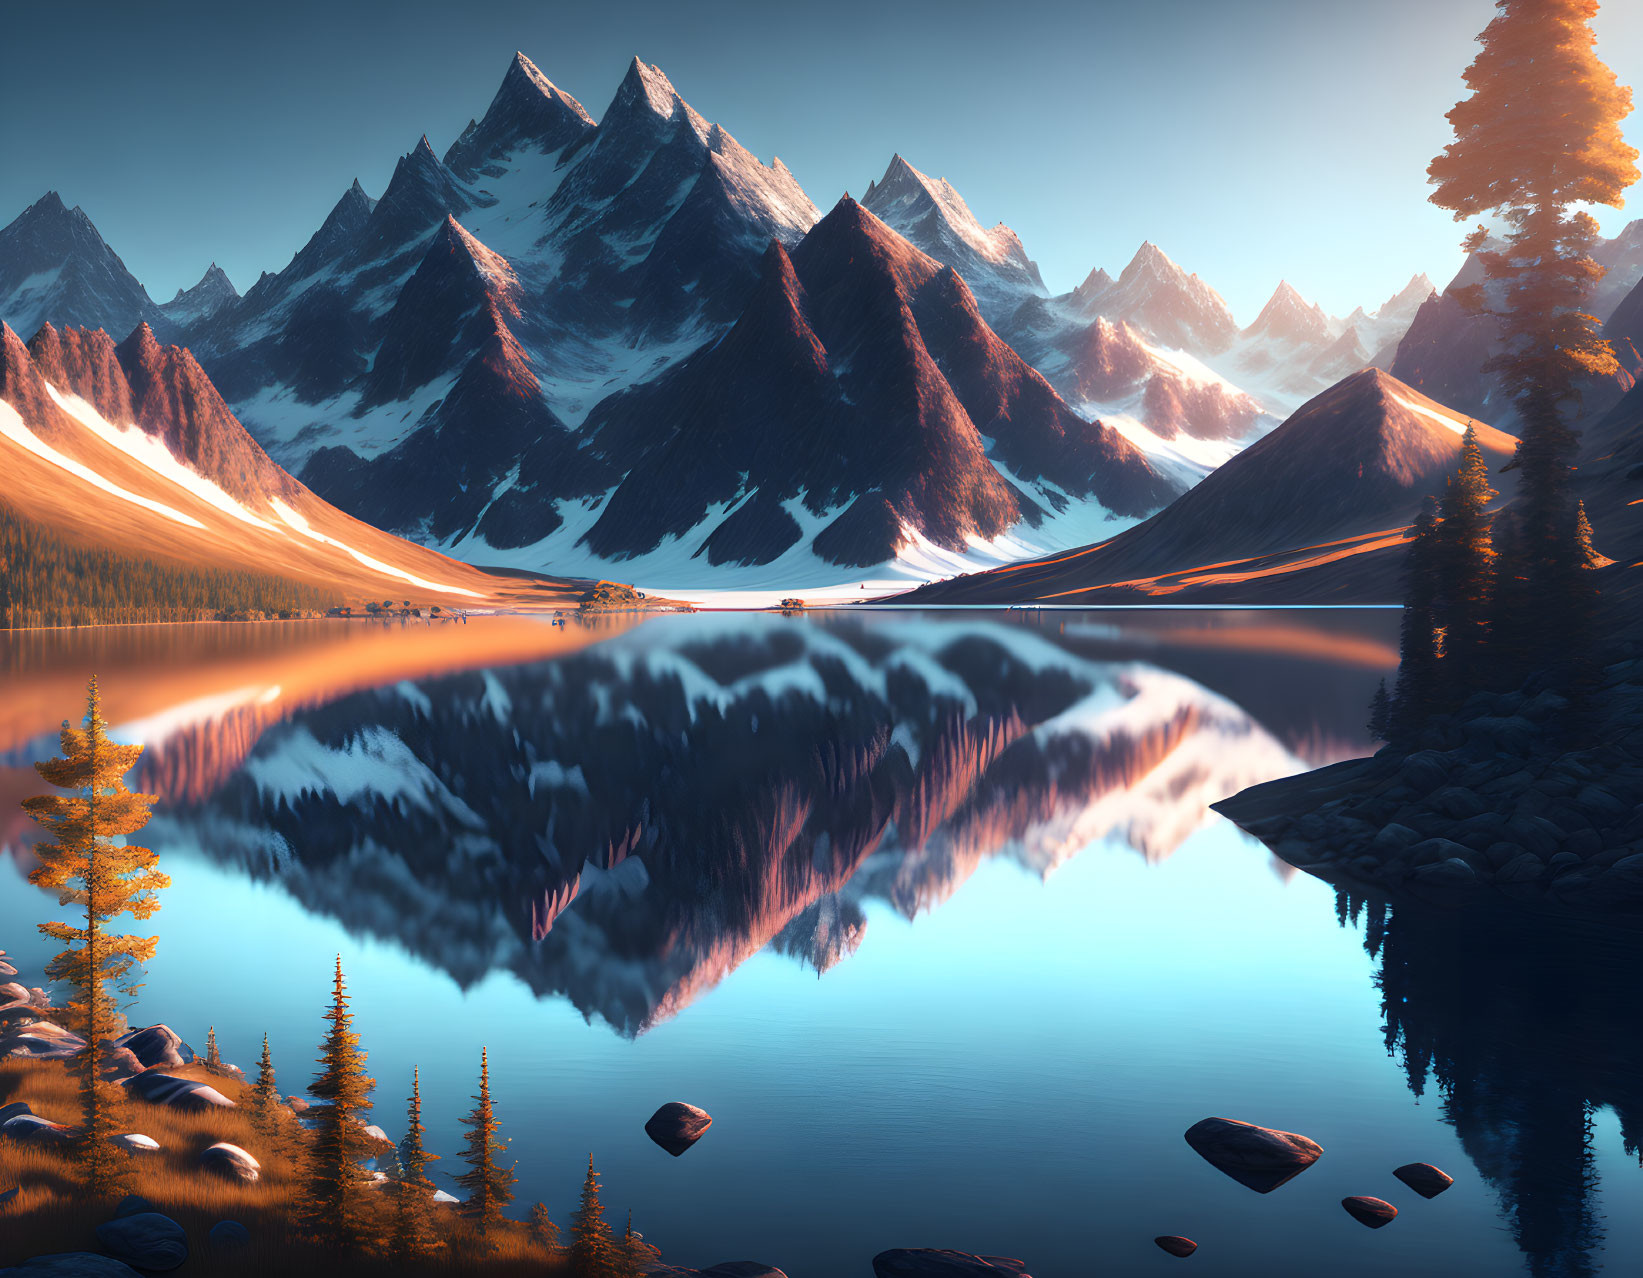 Mountain landscape with clear lake reflection at sunrise or sunset